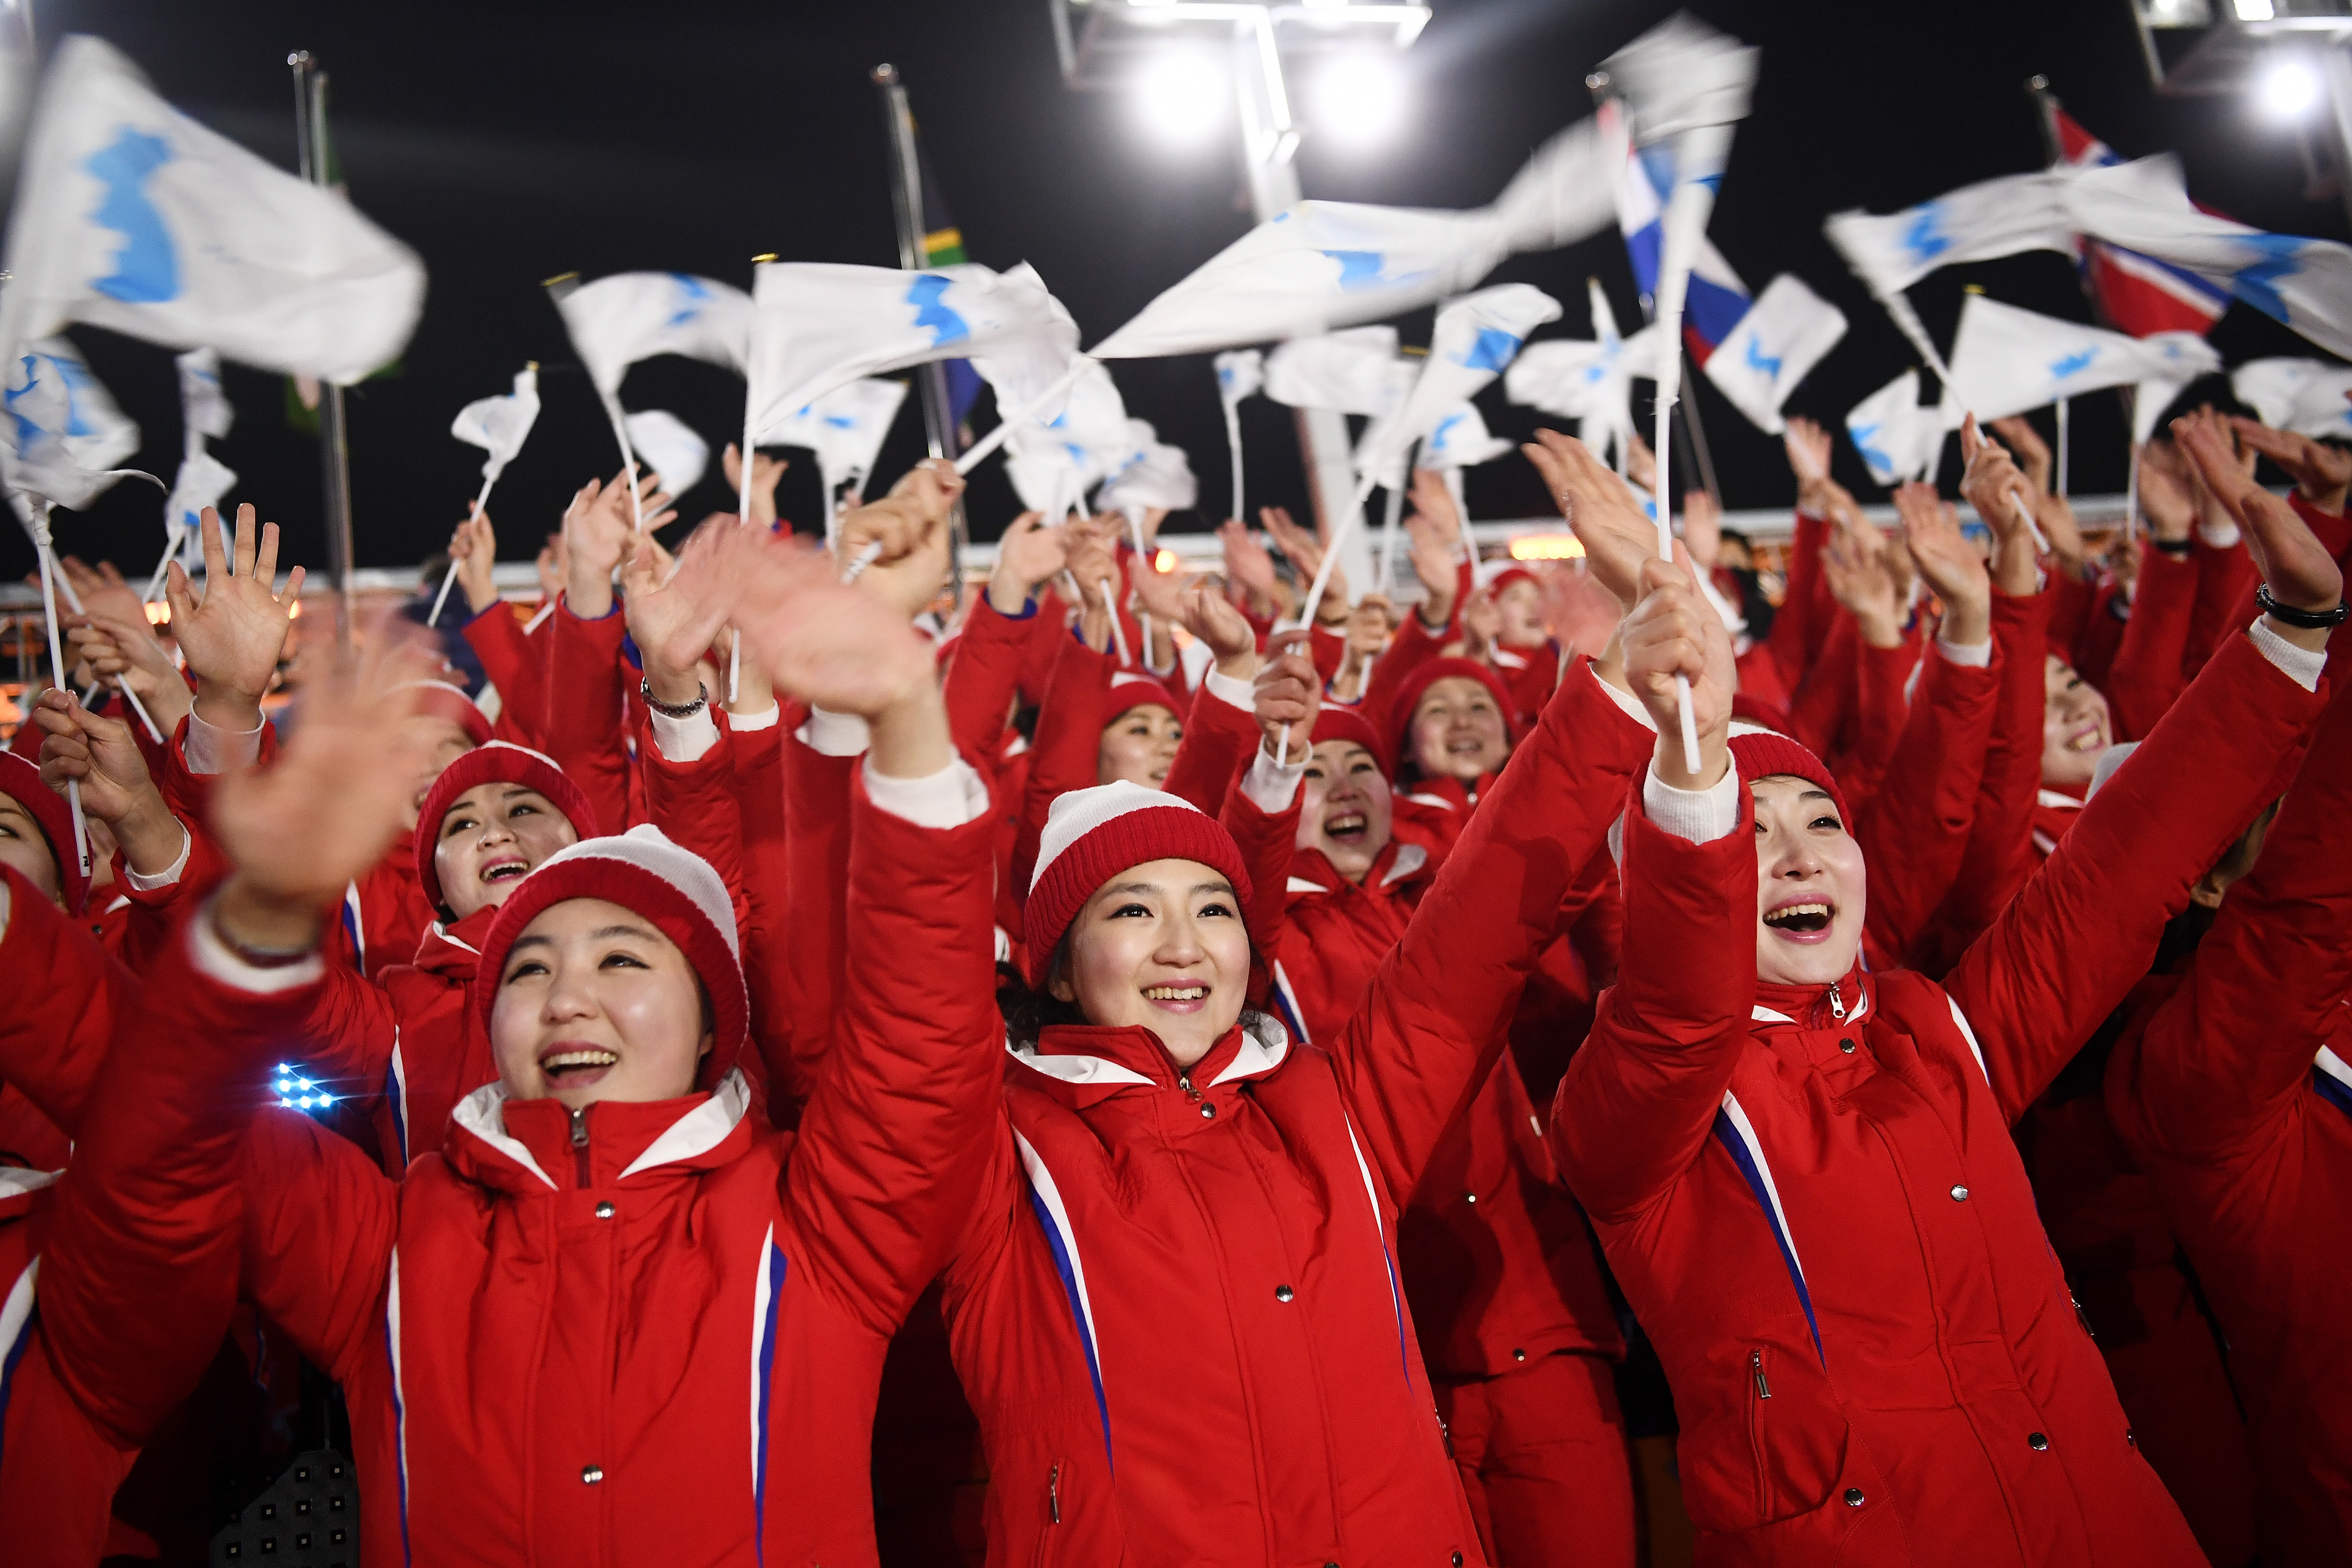 PYEONGCHANG-GUN, SOUTH KOREA - FEBRUARY 09: Spectators enjoy the atmopshere prior to the Opening Ceremony of the PyeongChang 2018 Winter Olympic Games at PyeongChang Olympic Stadium on February 9, 2018 in Pyeongchang-gun, South Korea. (Photo by Pool - Frank Fife/Bongarts/Getty Images)